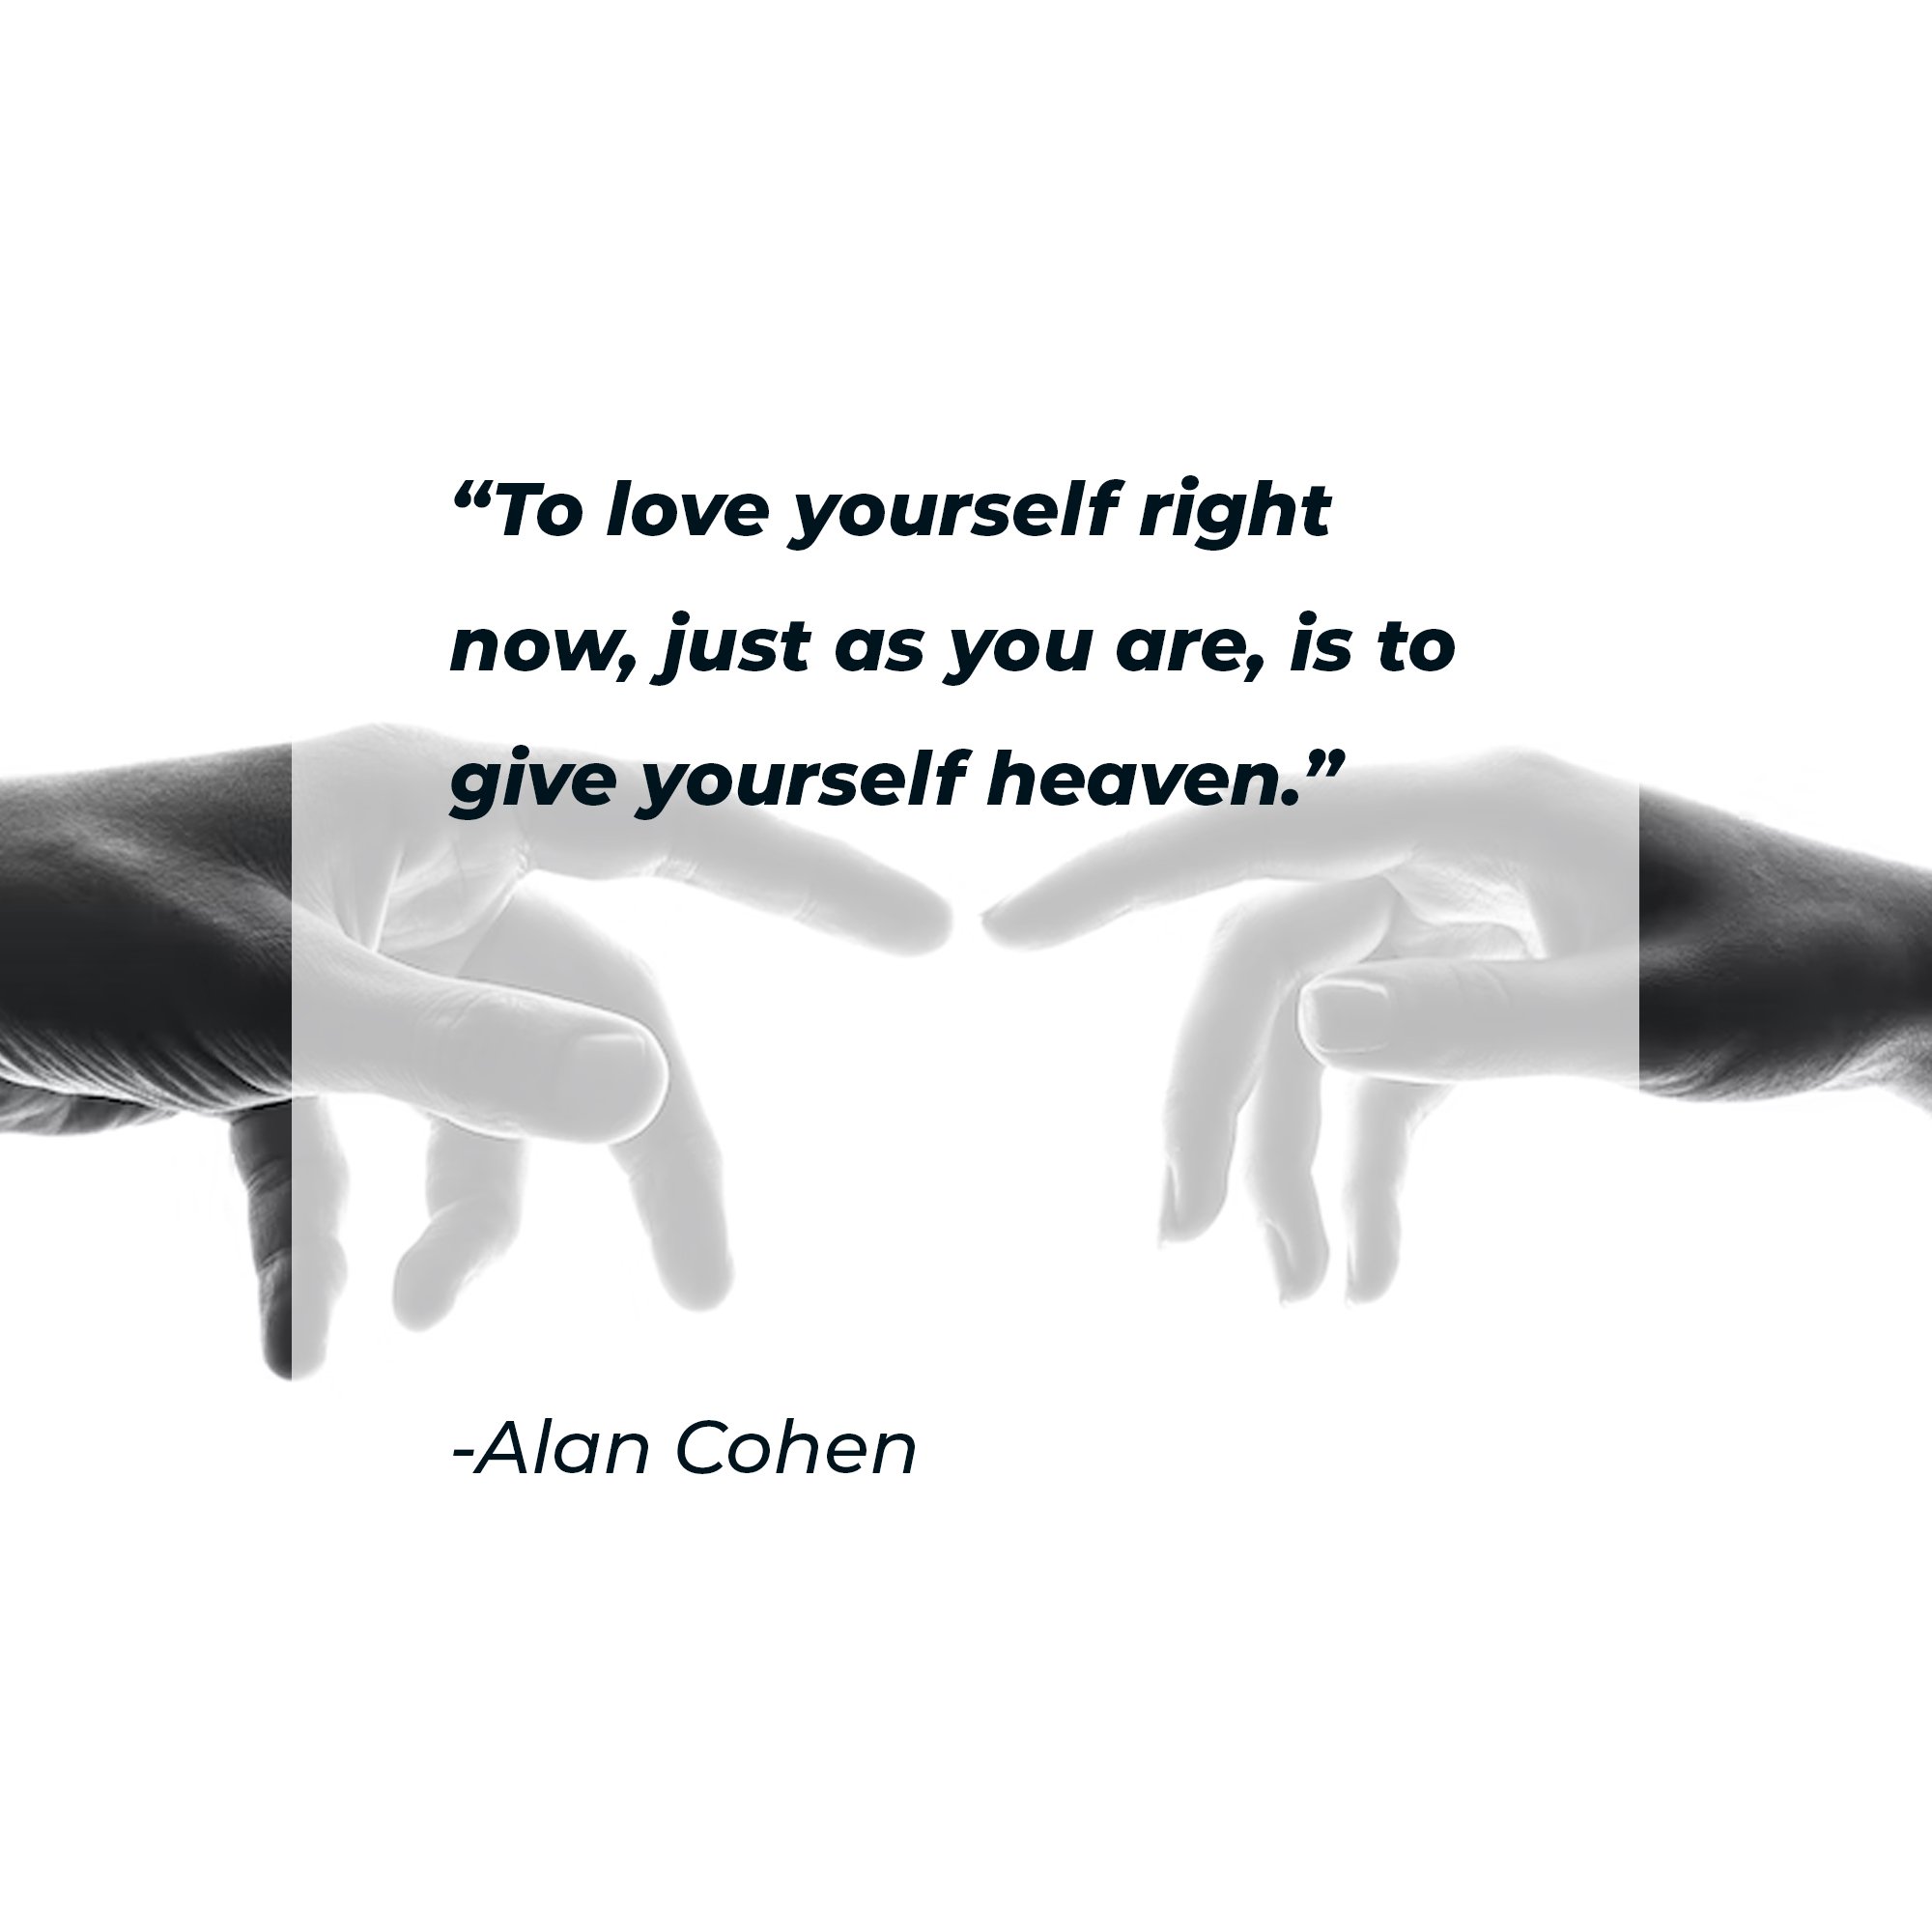 Alan Cohen’s quote: "To love yourself right now, just as you are, is to give yourself heaven." | Image: AmoDays